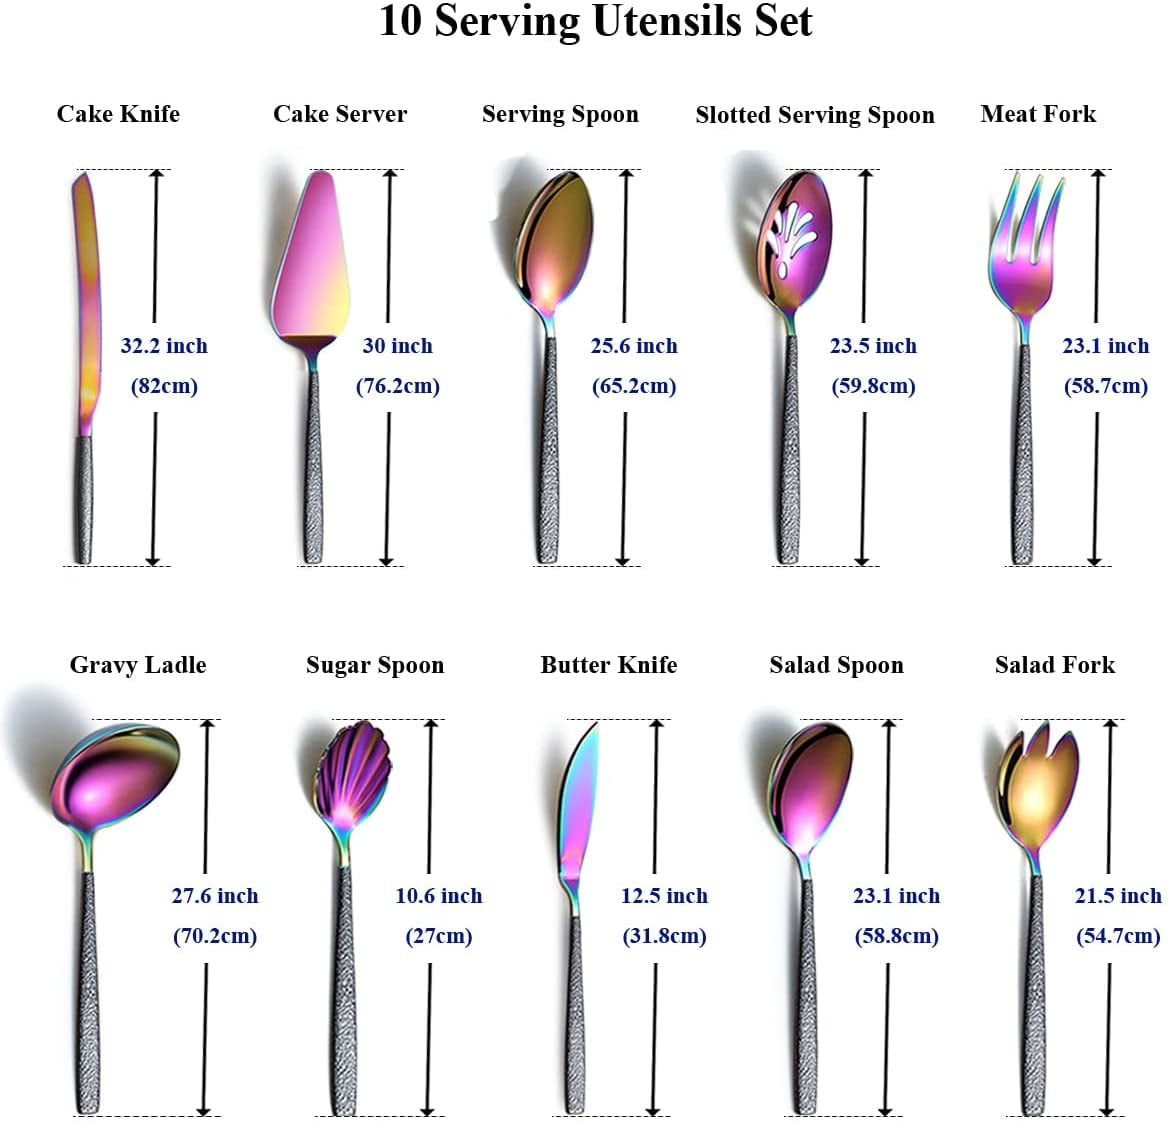 Slotted Serving Spoon Sugar Spoon Salad Fork Shiny Copper Head With Black Mars Handle Cold Meat Fork 10 Serving Spoons Cake Knife Cake Server Salad Spoon Gravy Ladle Metal Serving Utensils 